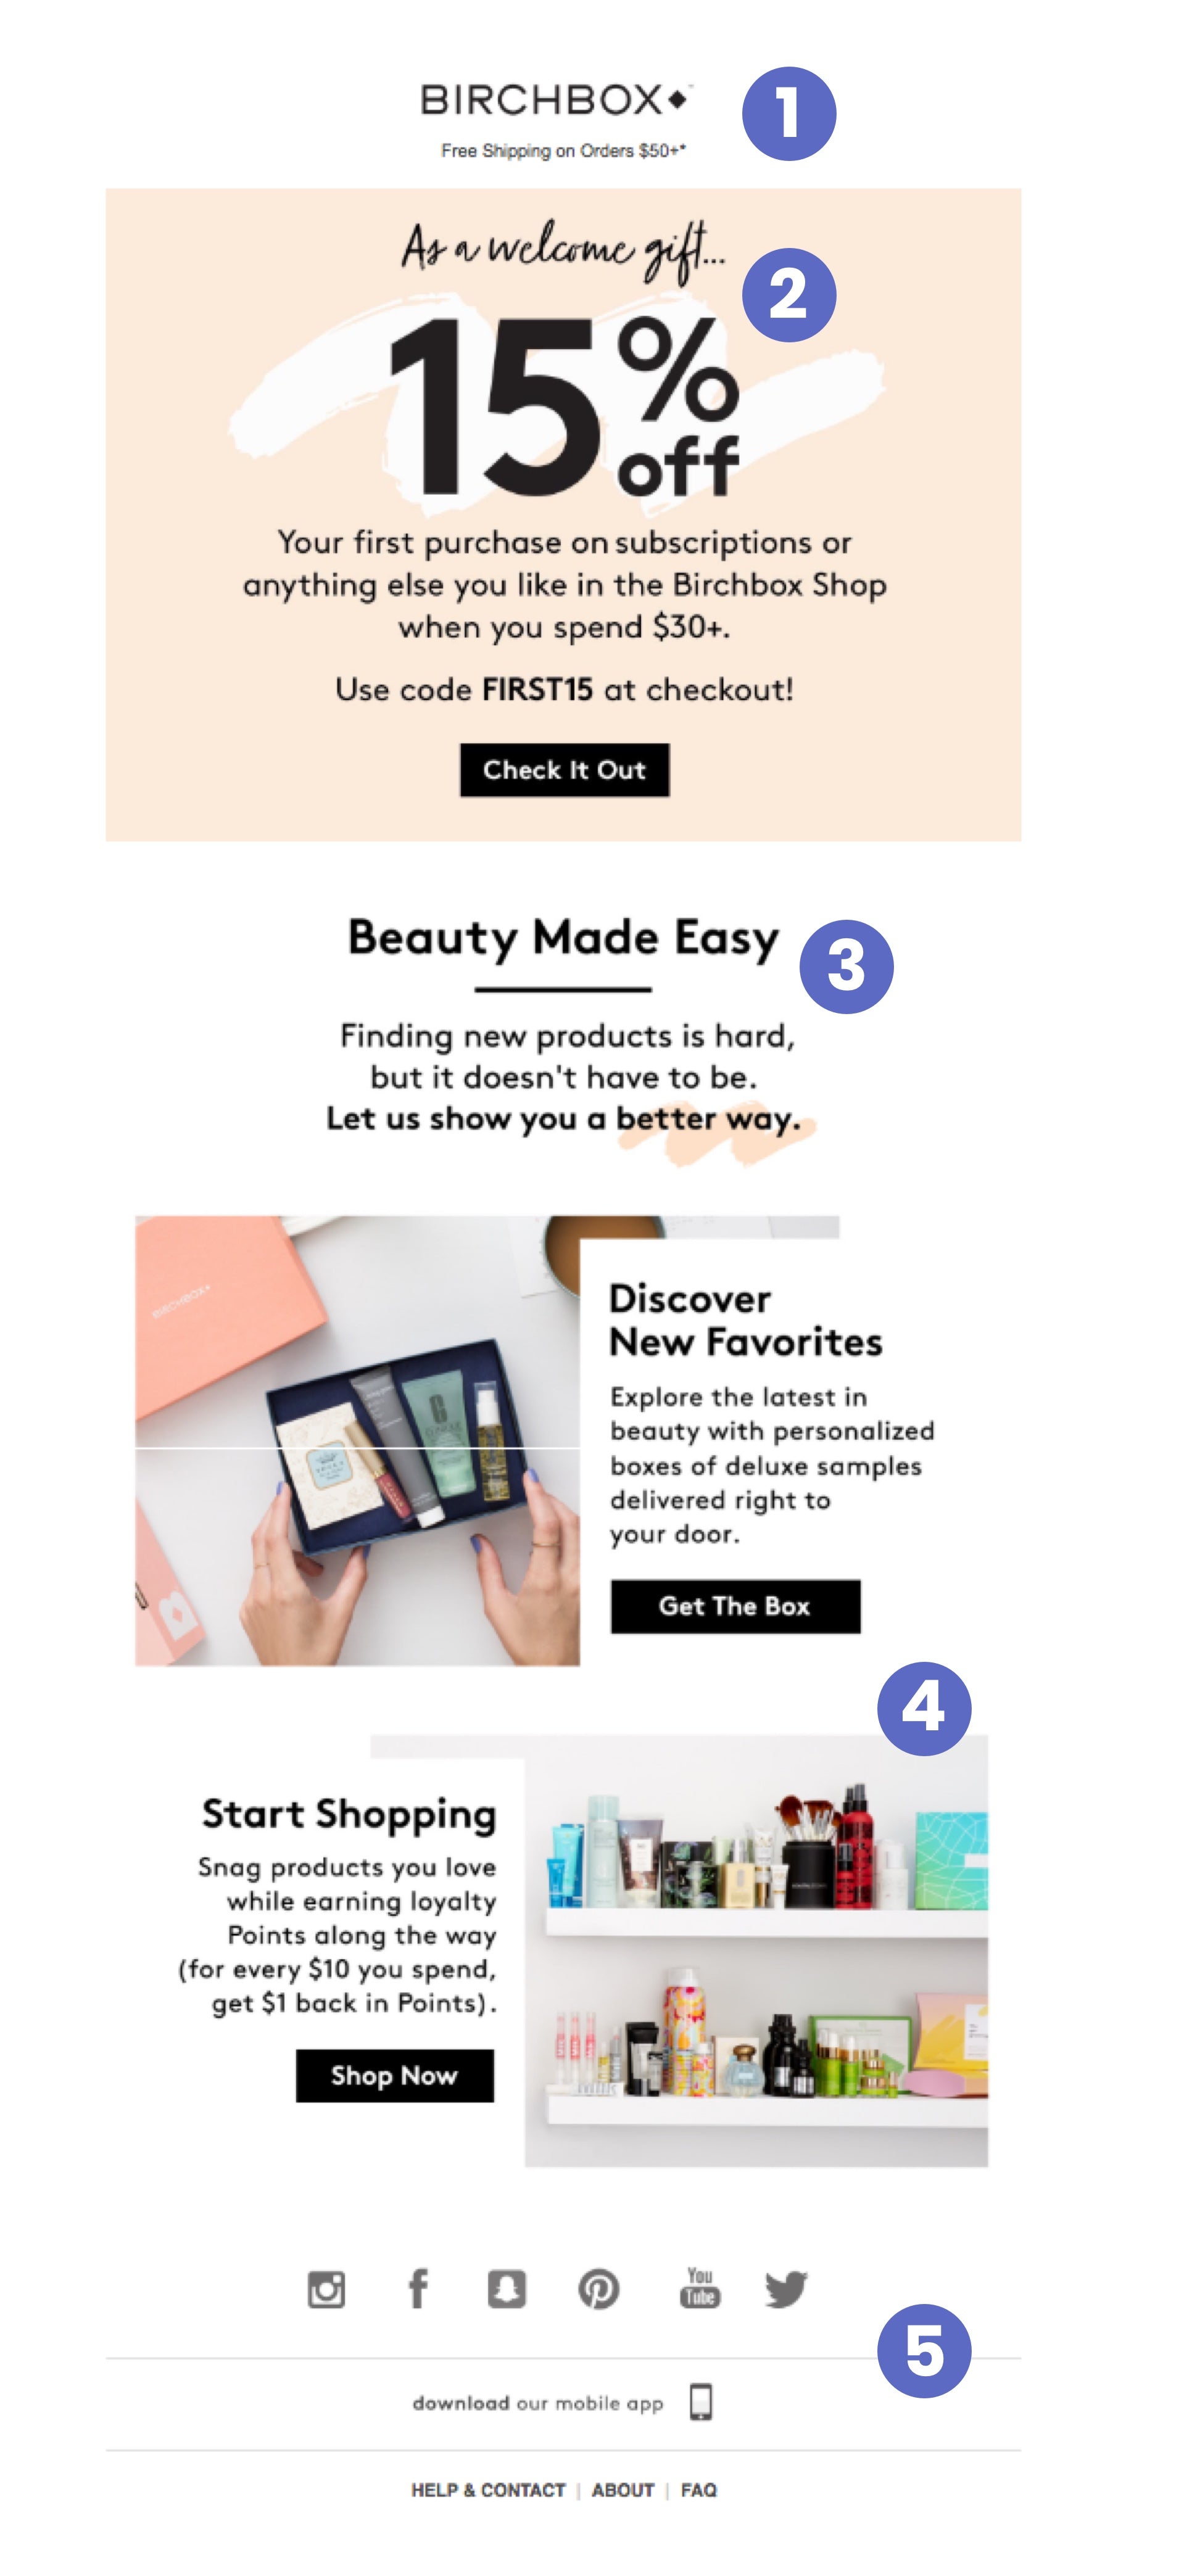 An example of ecommerce email marketing from Birchbox